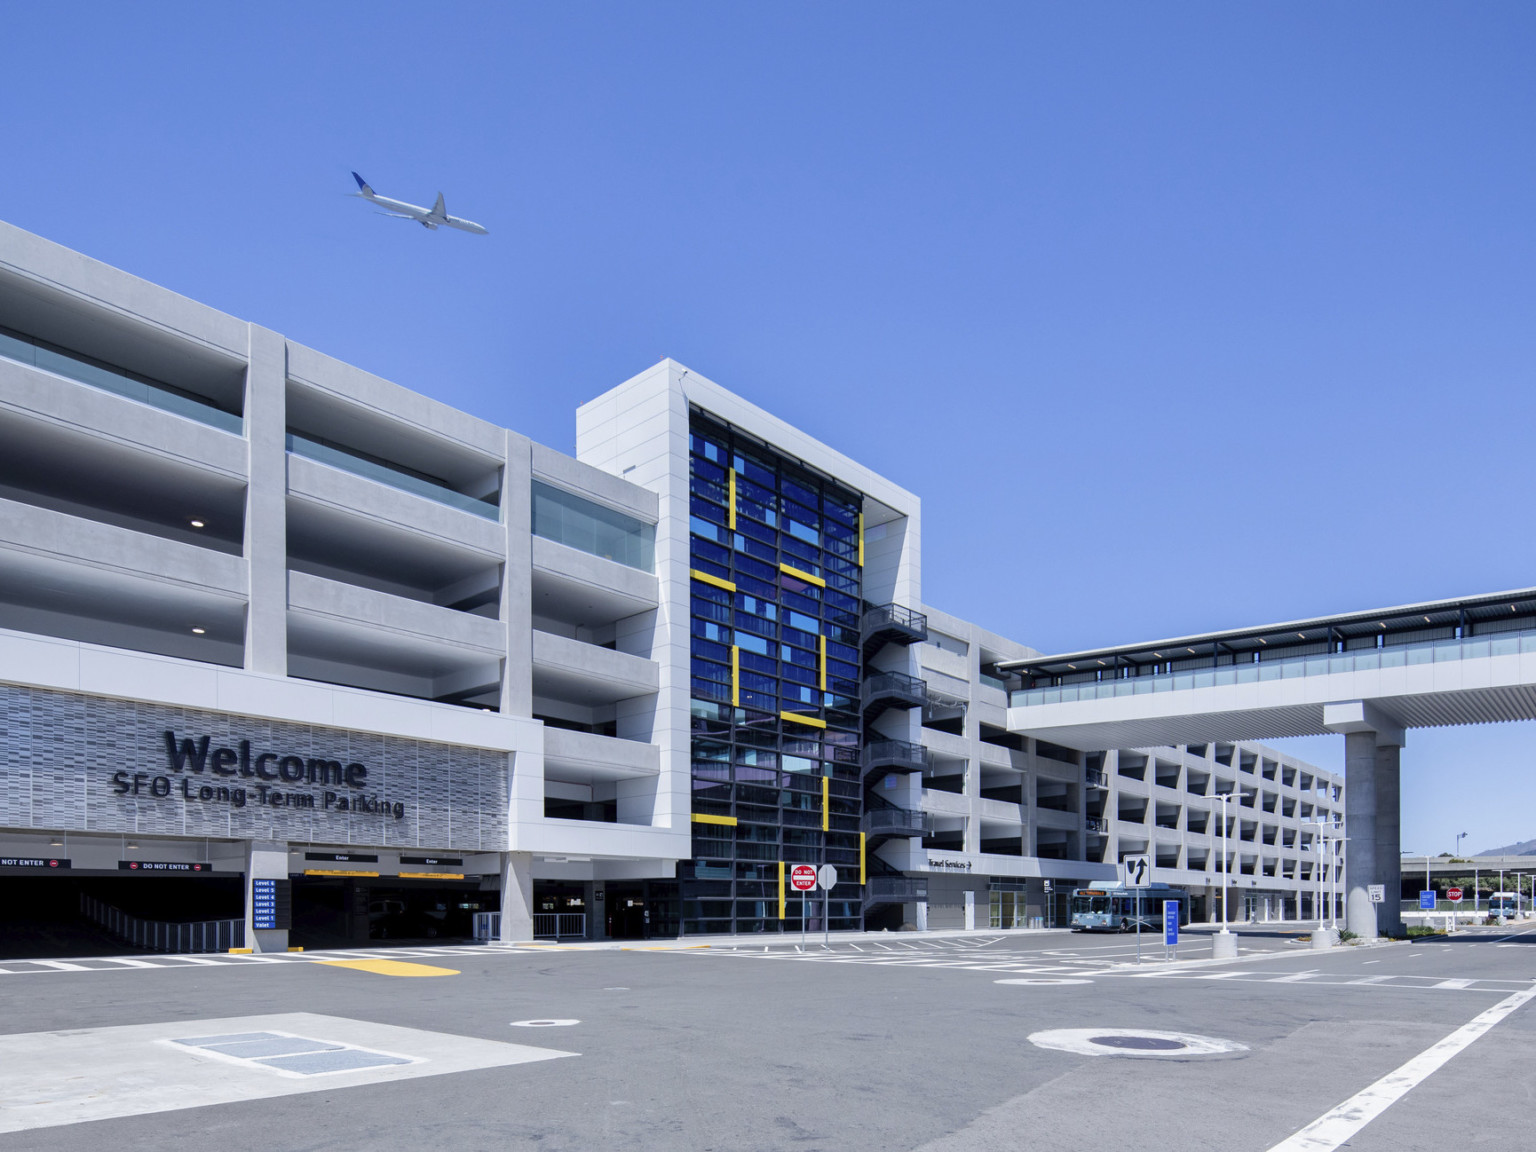 San Francisco International Airport Long Term Parking Garage, 6 stories with glass facade center and stairs. Entrance to left